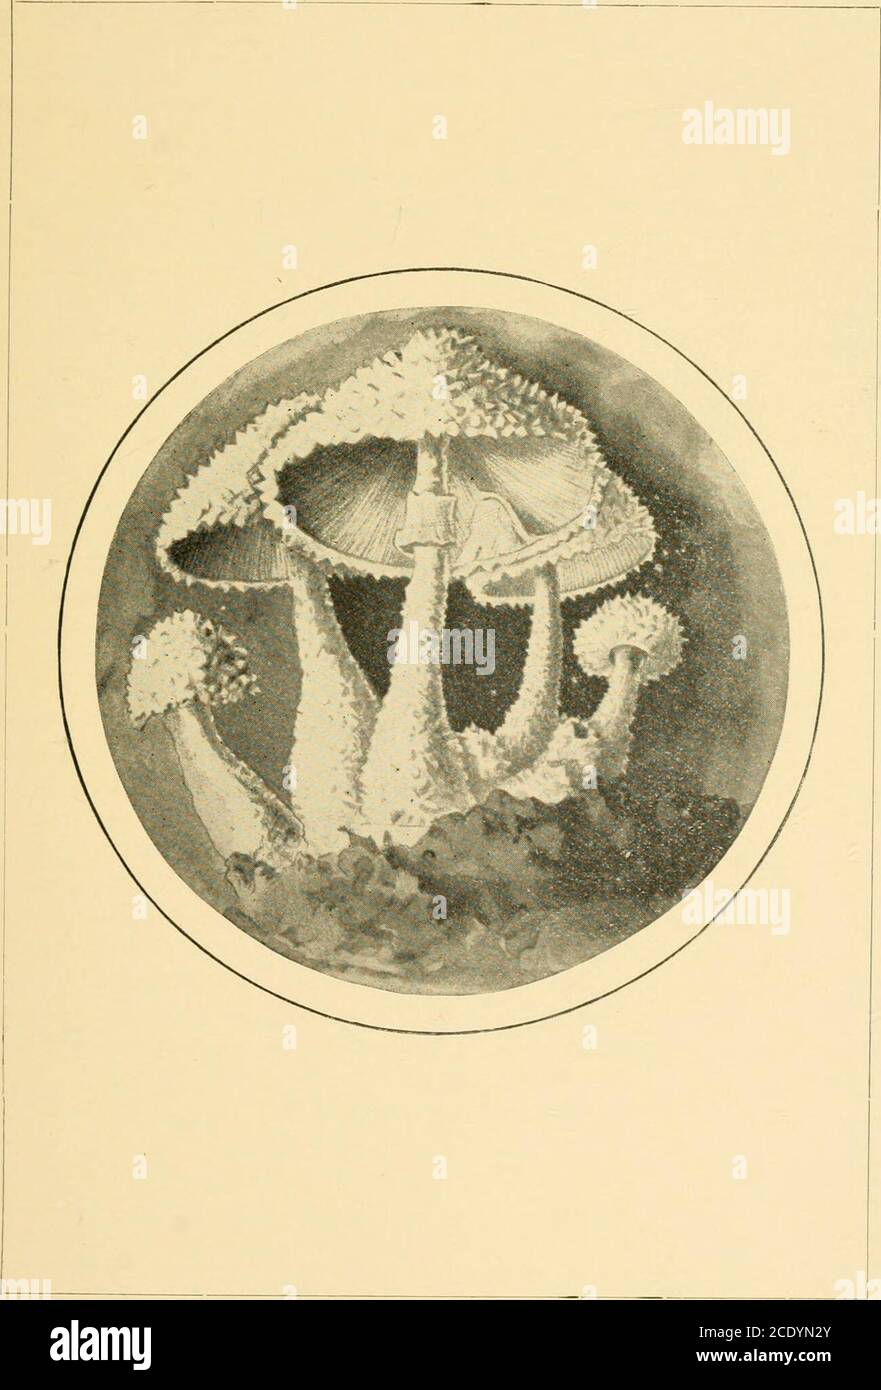 . Student's hand-book of mushrooms of America edible and poisonous . adorned with mealy evanescent scales, margin irregular; gillswhite, at length remote. Stem hollow and floccose, narrow at top,ventricose ; ring evanescent. Generally found in hothouses. Cap 1 to3 inches broad. Stem 3 to 6 inches high. Spores white. L. cristata is a common species found on lawns and in fields where the•i-rass is short. The plants are small, the cap from ^ to 1^ inches inwidth. Not very fleshy. The cuticle of the cap is at first continuous andsmooth but soon breaks into reddish scales. The stem is fistulose,sle Stock Photo